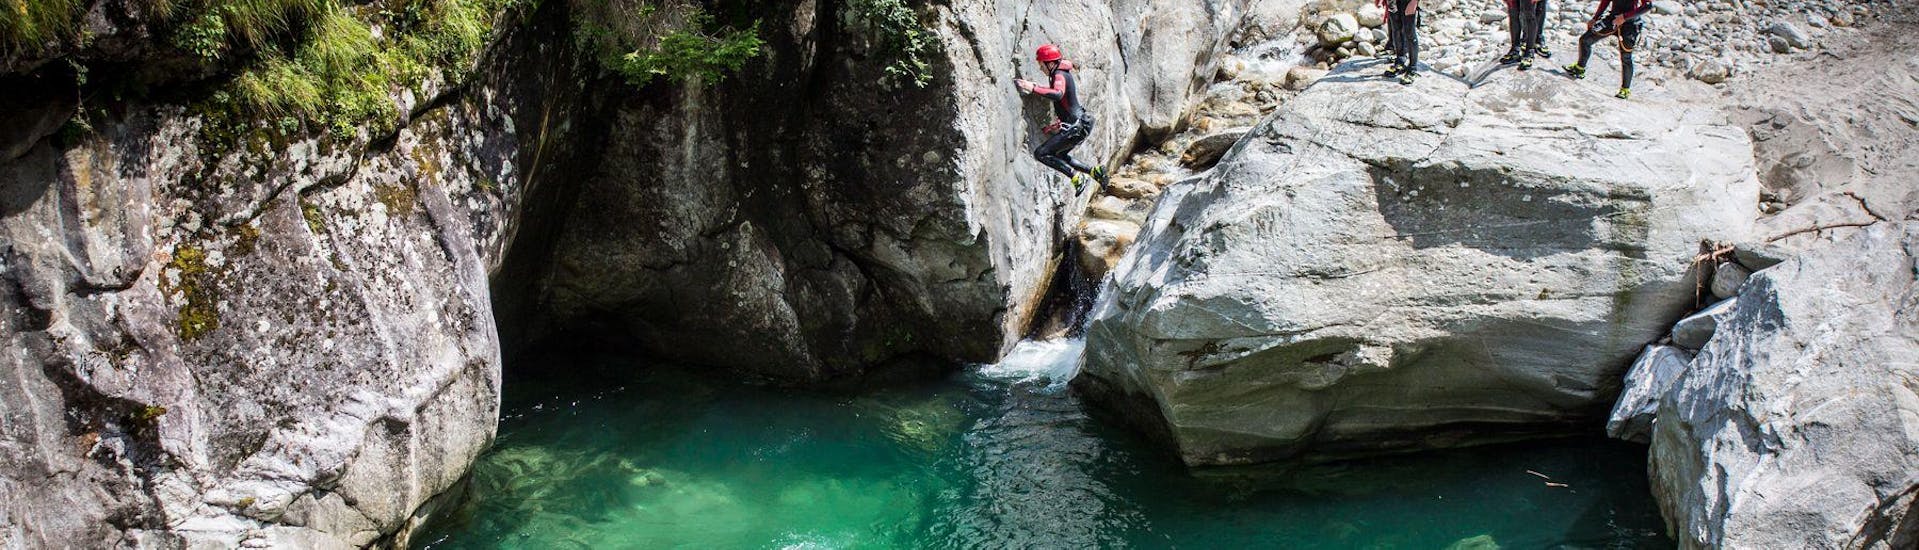 A group of people taking part in the tour Canyoning for Families - Zemmschlucht with Mountain Sports Mayrhofen is jumping into a natural pool of water one by one.